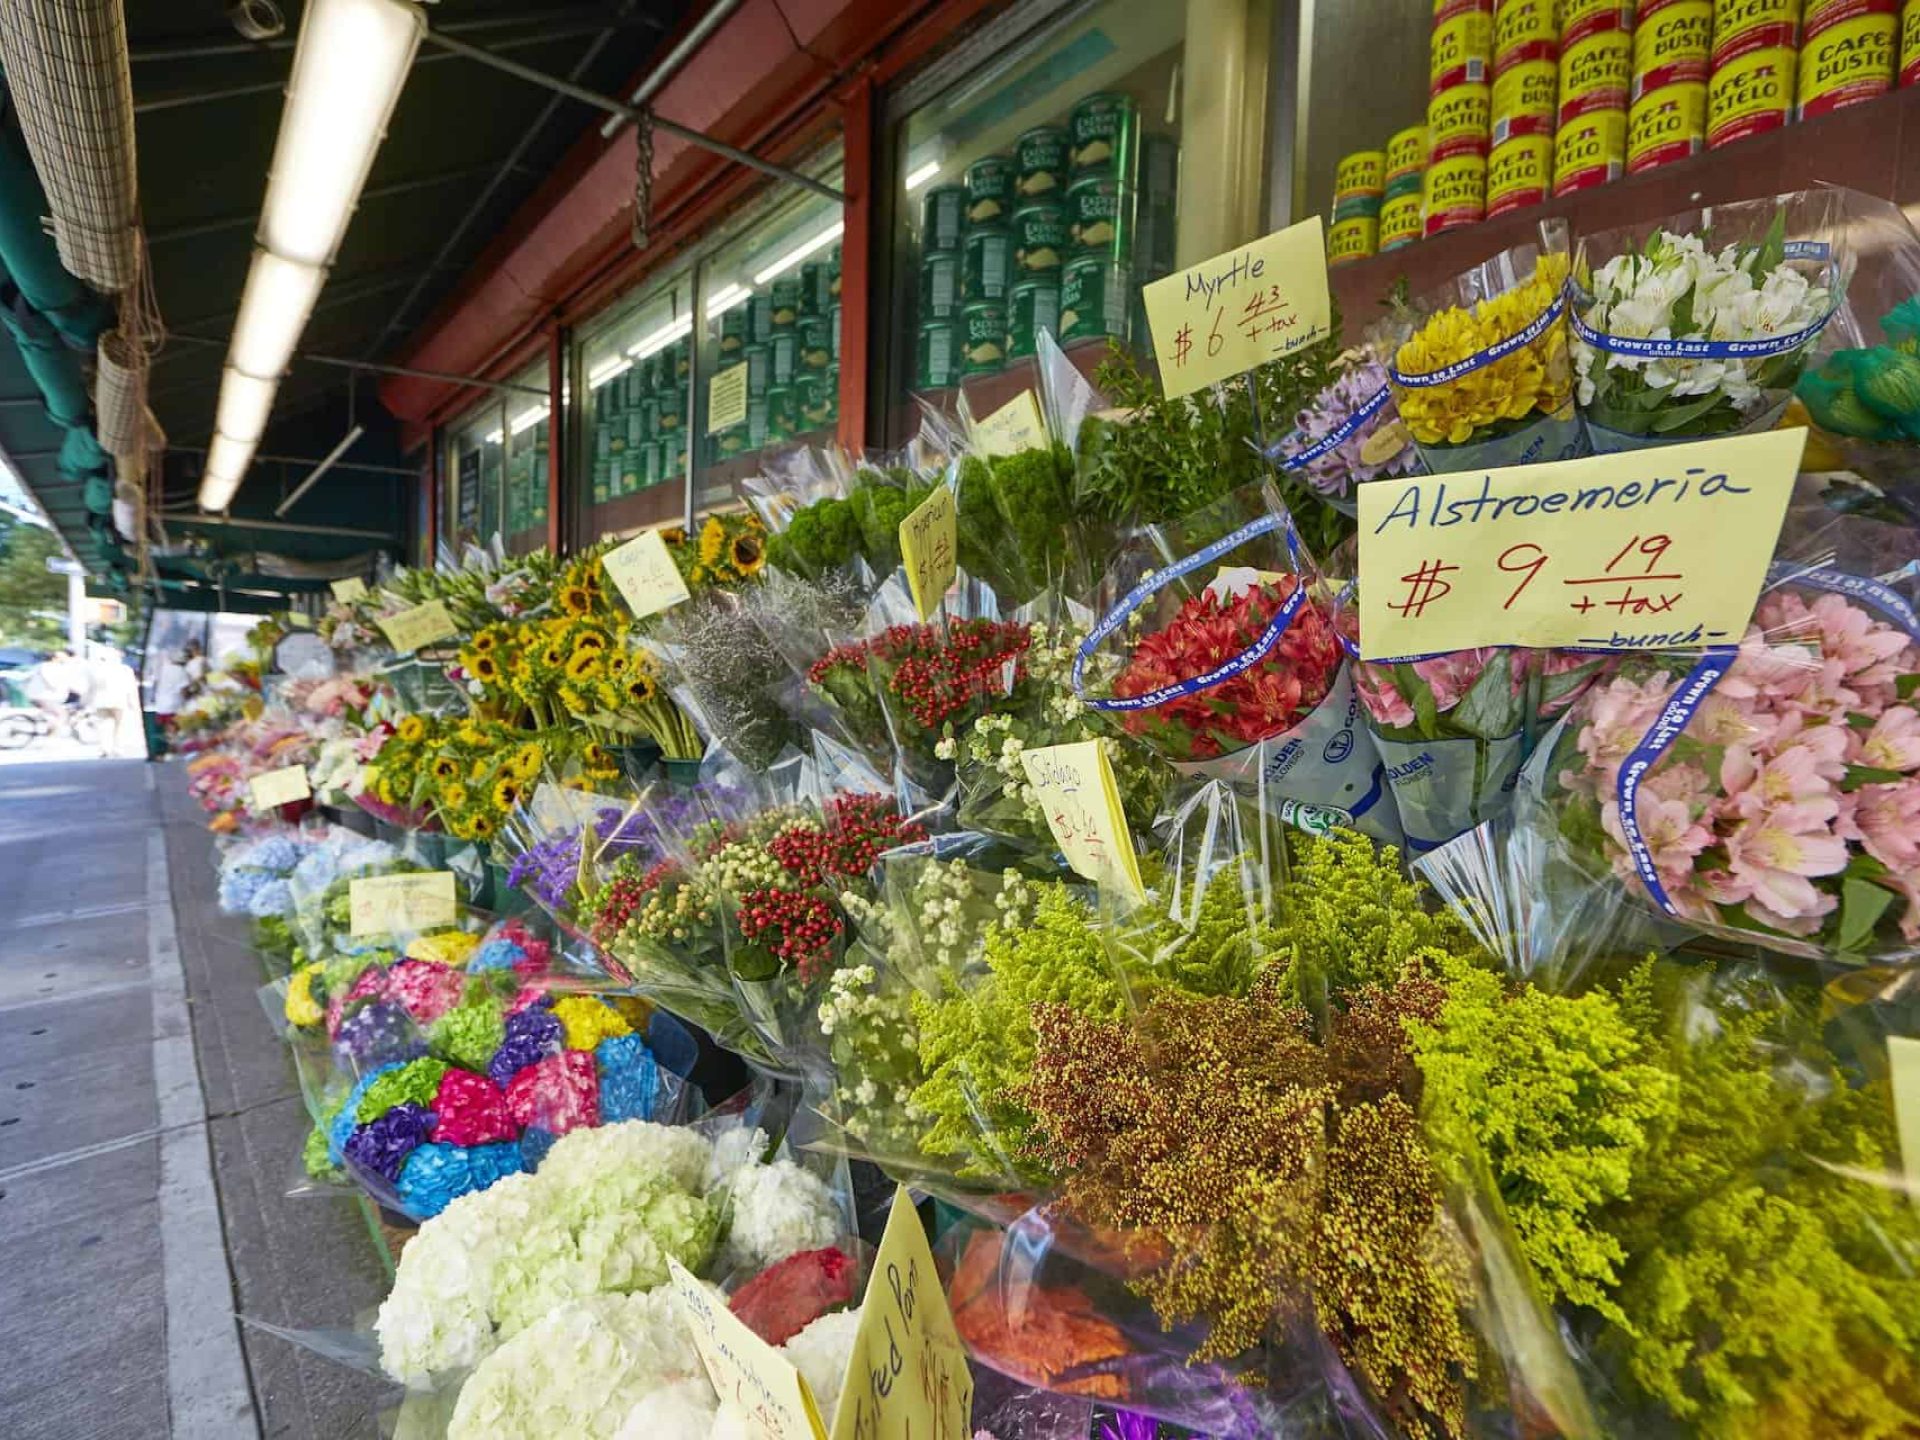 Tiered flower display outside a market in New York City. Four rows of flowers with flower names and pricing on yellow tags.